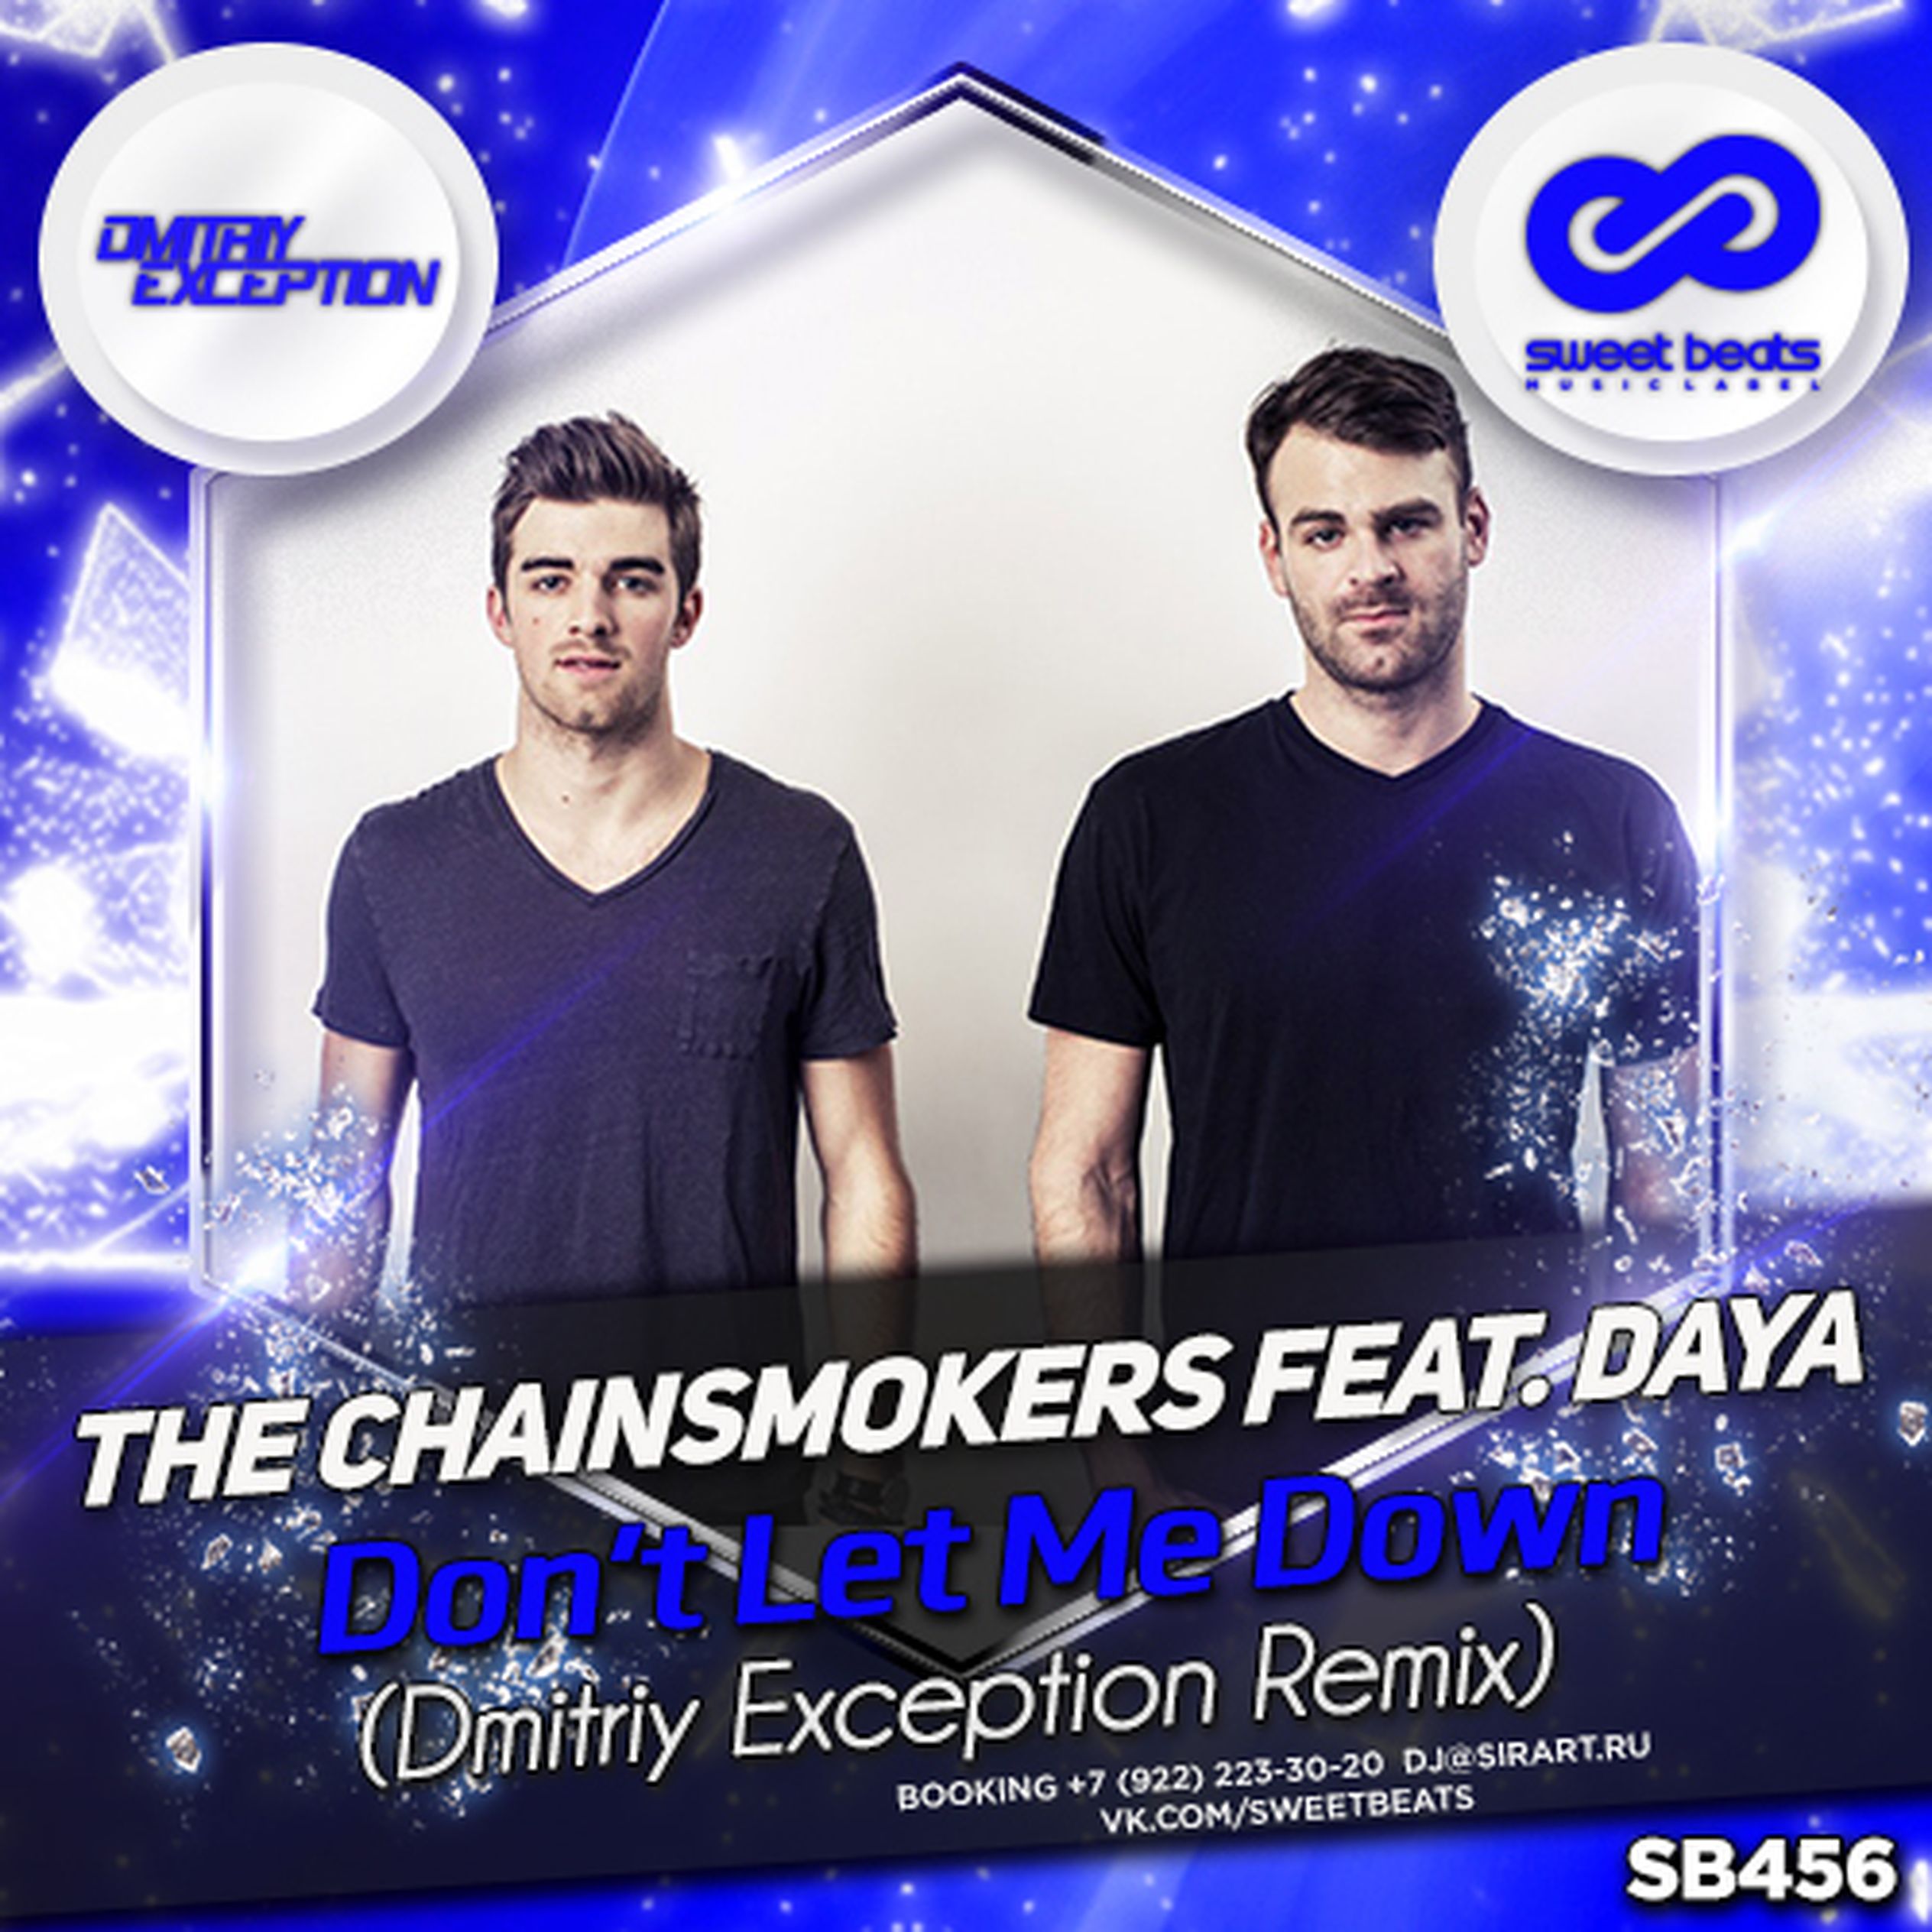 Фото the Chainsmokers don. My Bad the Chainsmokers. Грибы, Dmitriy exception & ton don - велик (DJ Raptor, DJ tima Mash up). THE+CHAINSMOKERS+FEAT.+DAYA DJ JOUNCE+DON%27T+LET+ME+DOWN REMIX BACKSTAGE. The chainsmokers feat daya don